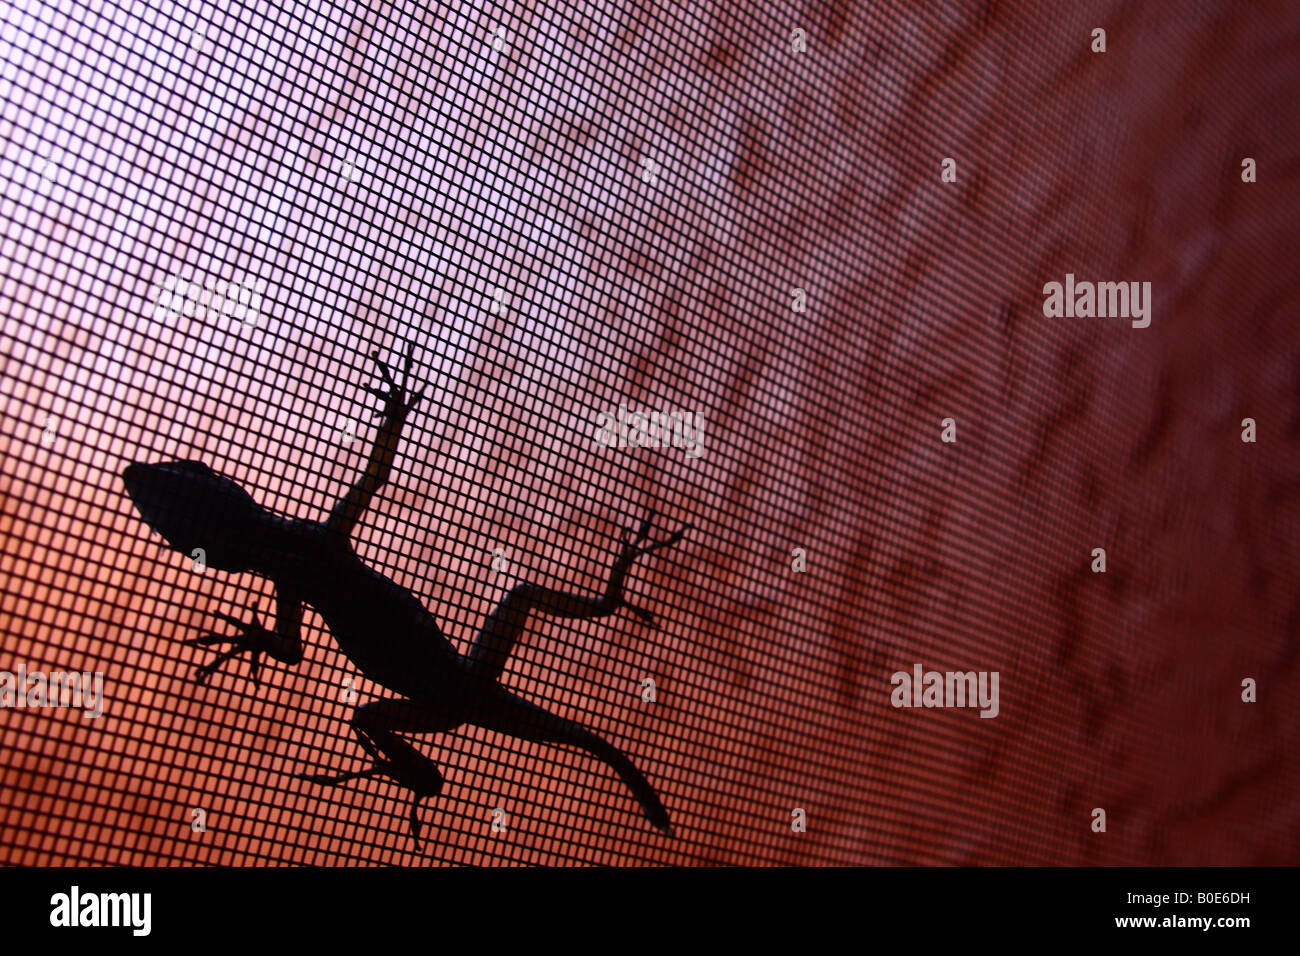 Silhouette of lizard on a screen Stock Photo